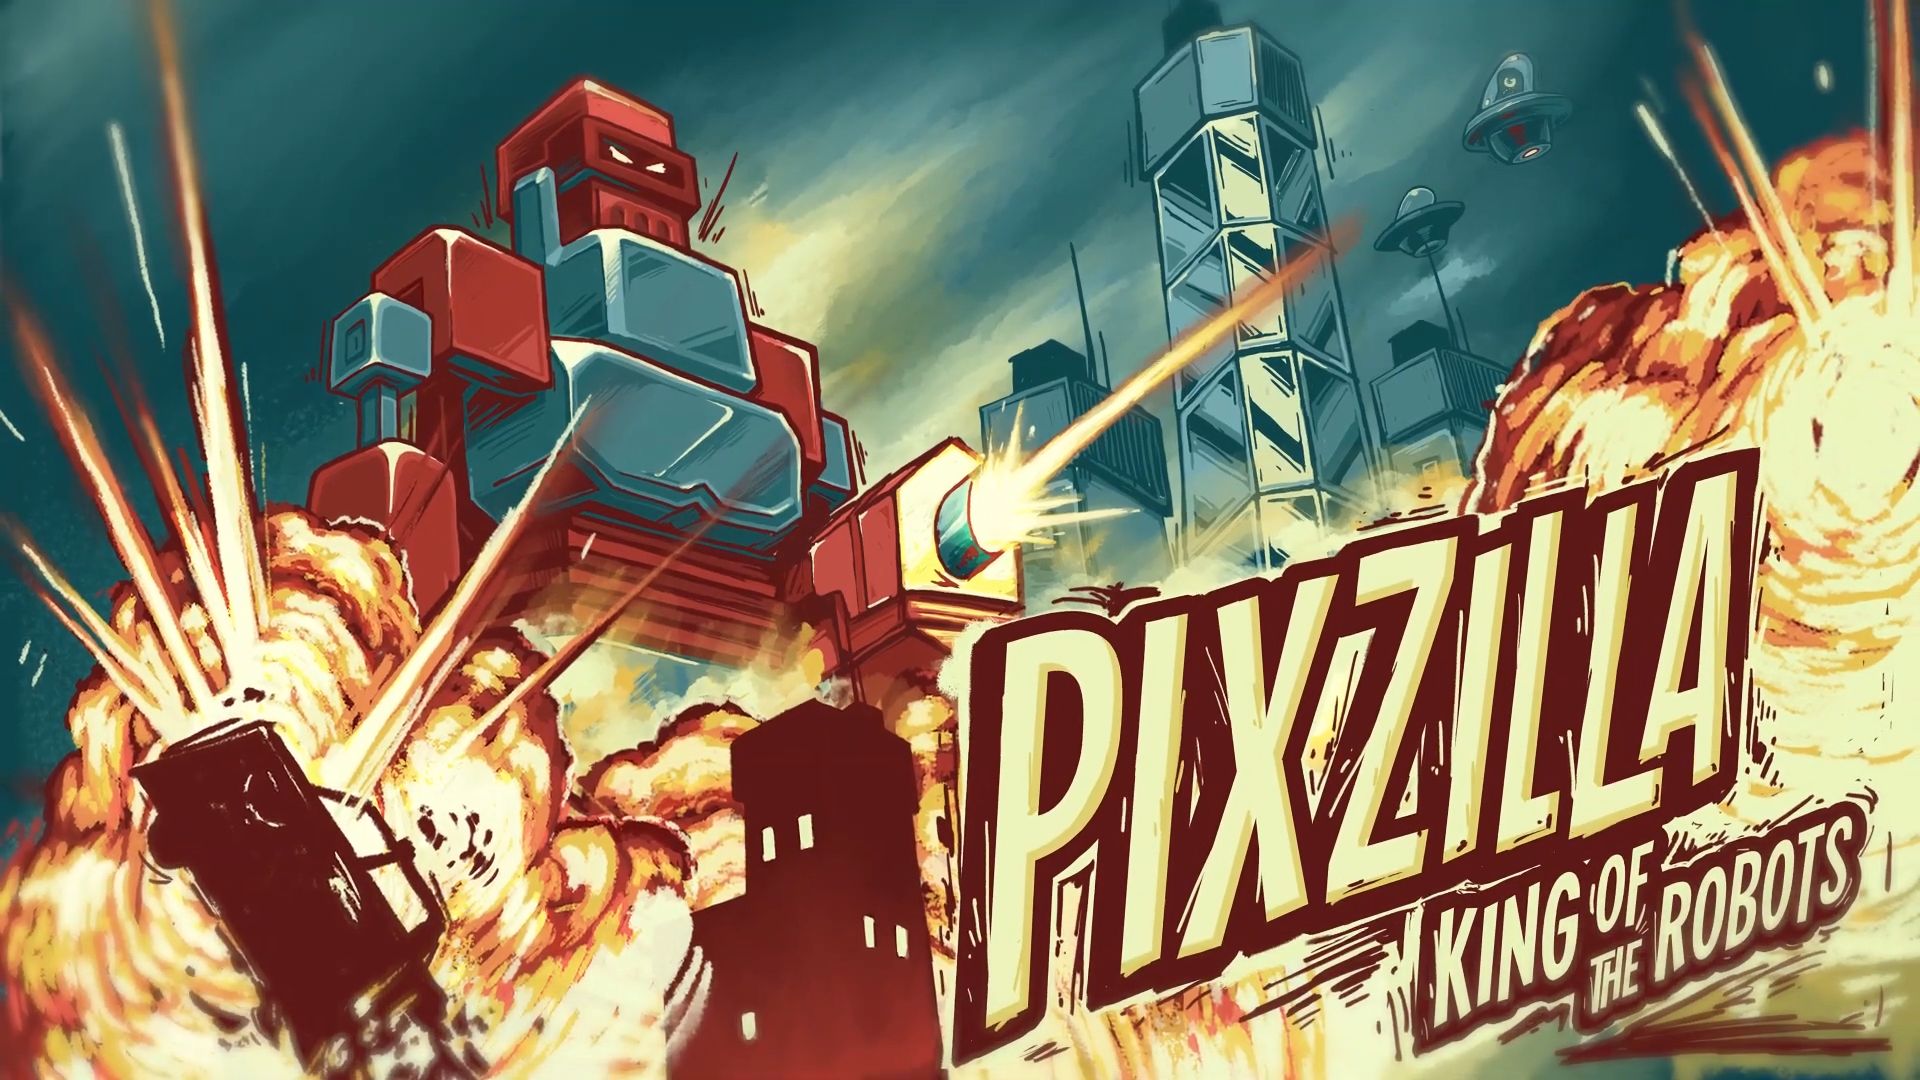 Scarica Pixzilla / King of the Robots gratis per Android.